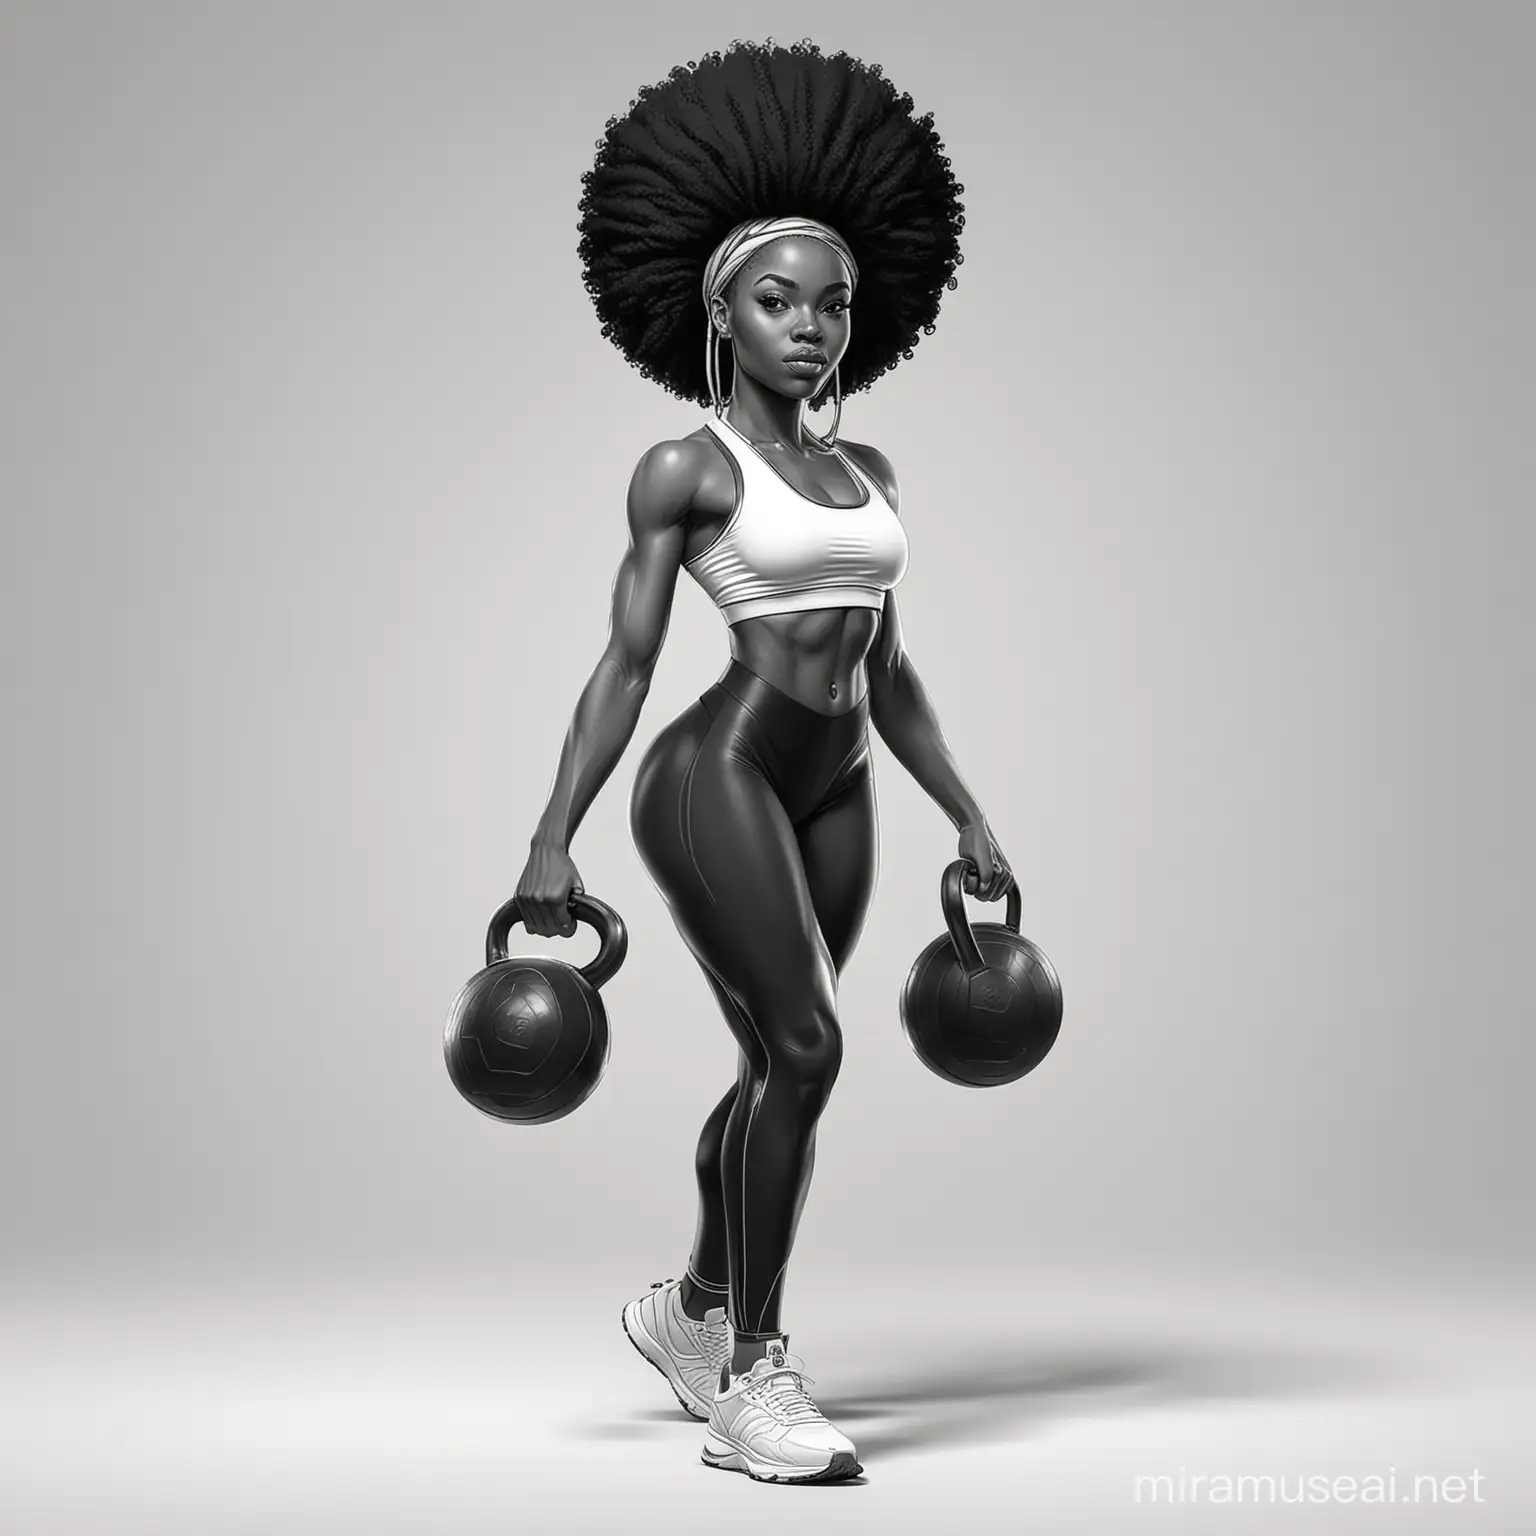 Girl shows her muscles strength Black and White Stock Photos